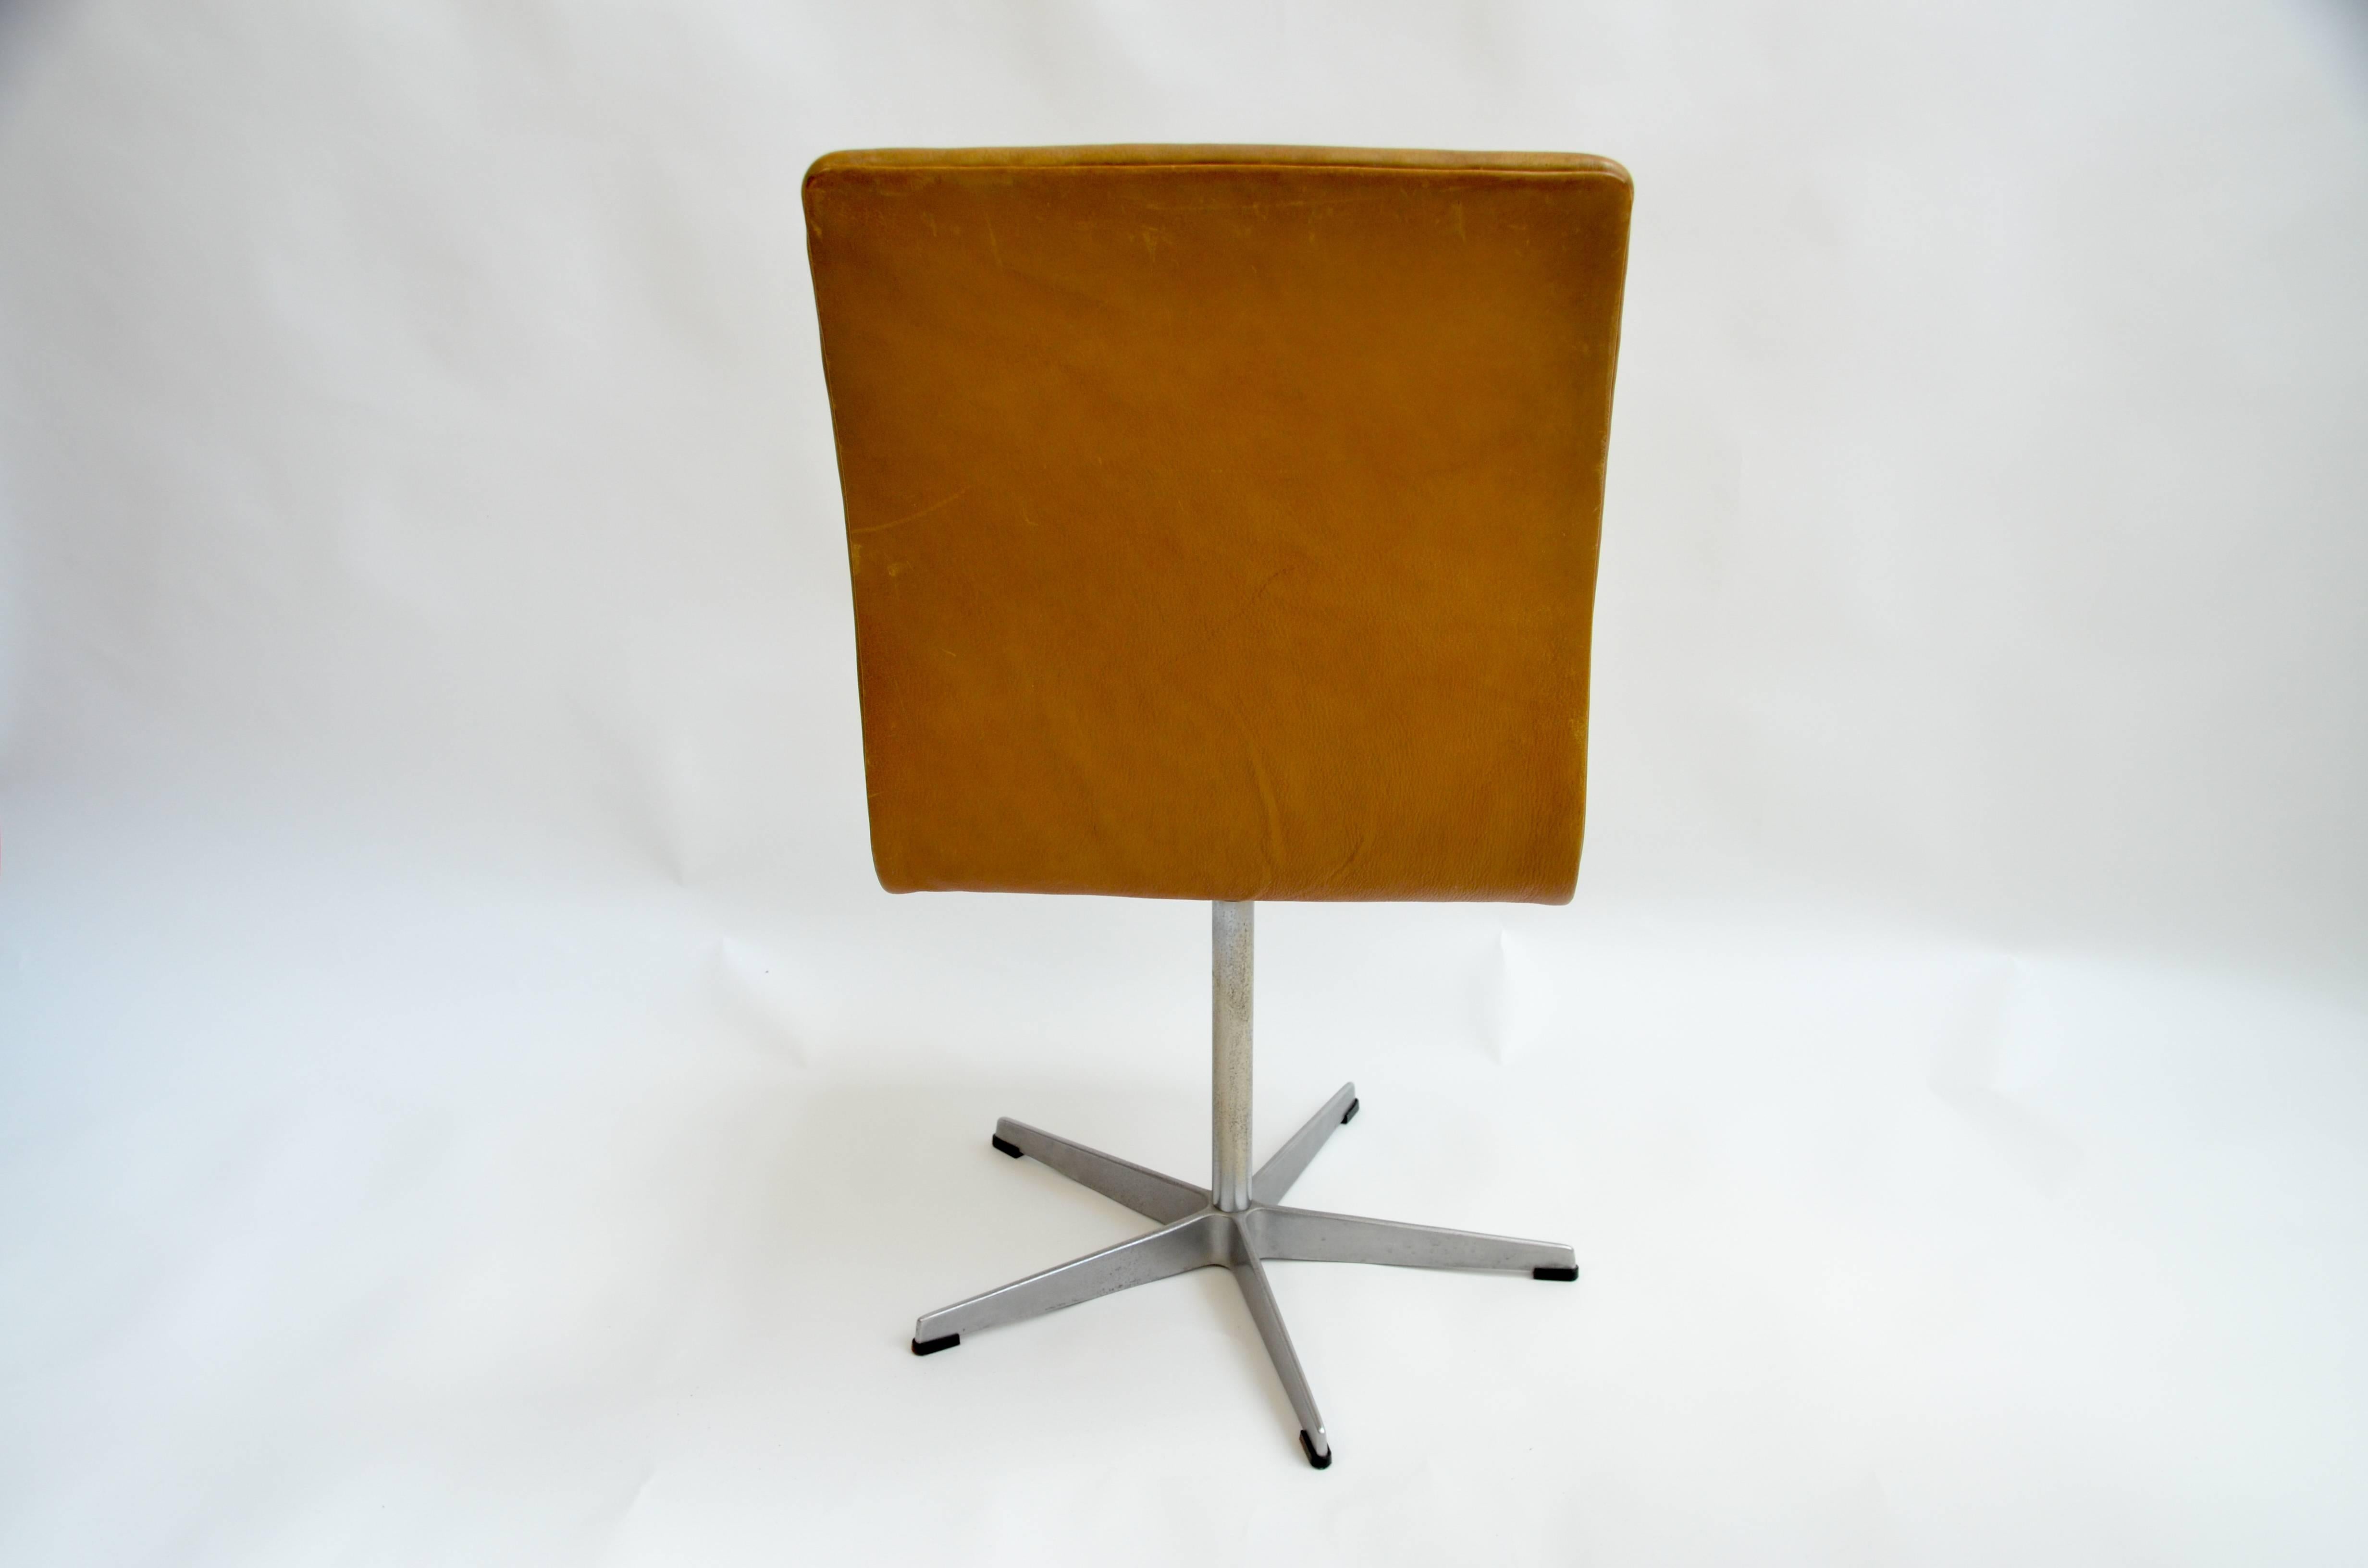 Early Oxford chair in beautiful patinated old leather designed by Arne Jacobsen for Fritz Hansen.
 